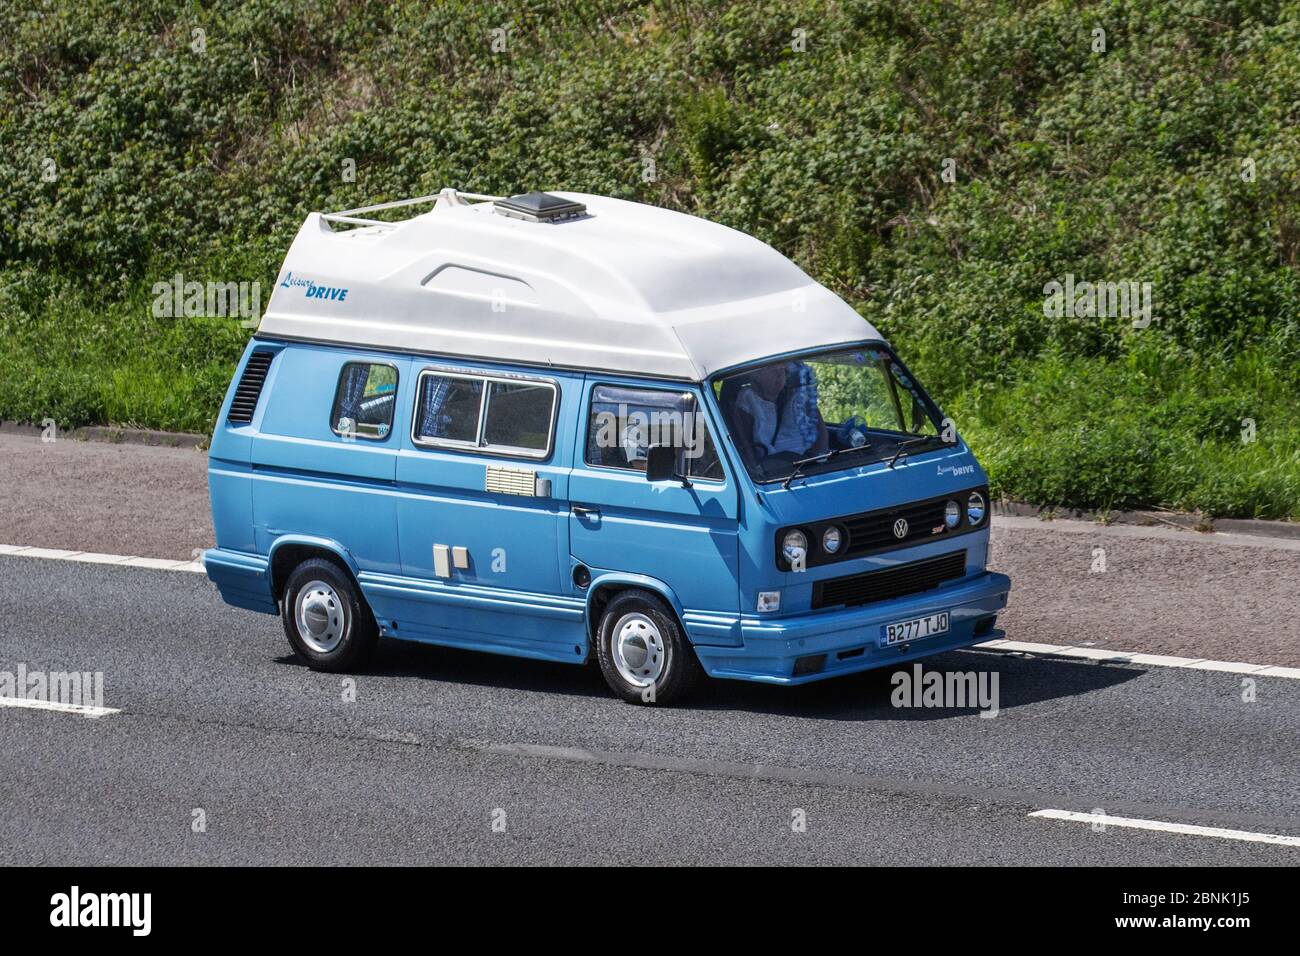 1984 80s VW Volkswagen Transporter 78Ps; ; Touring Caravans and Motorhomes, campervans, RV leisure vehicle, family holidays, caravanette vacations, caravan holiday, life on the road, UK Stock Photo